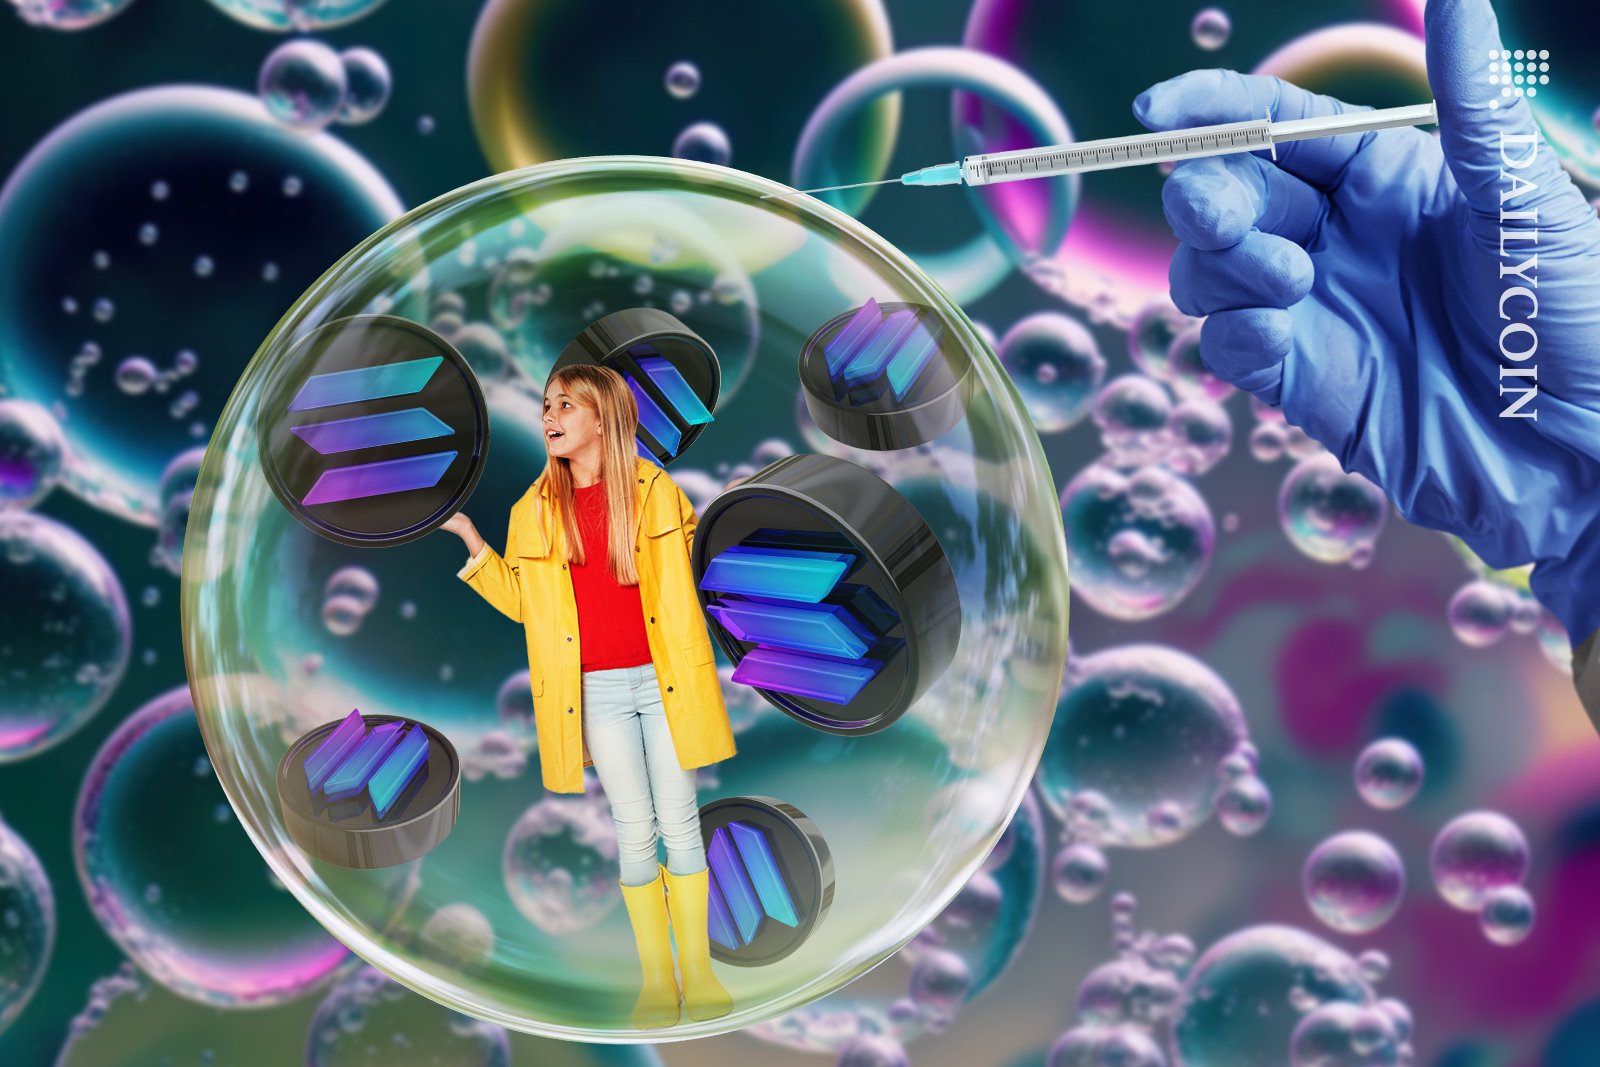 Girl in a bubble with Solana coins whilst a hand is injecting the SOL coins.